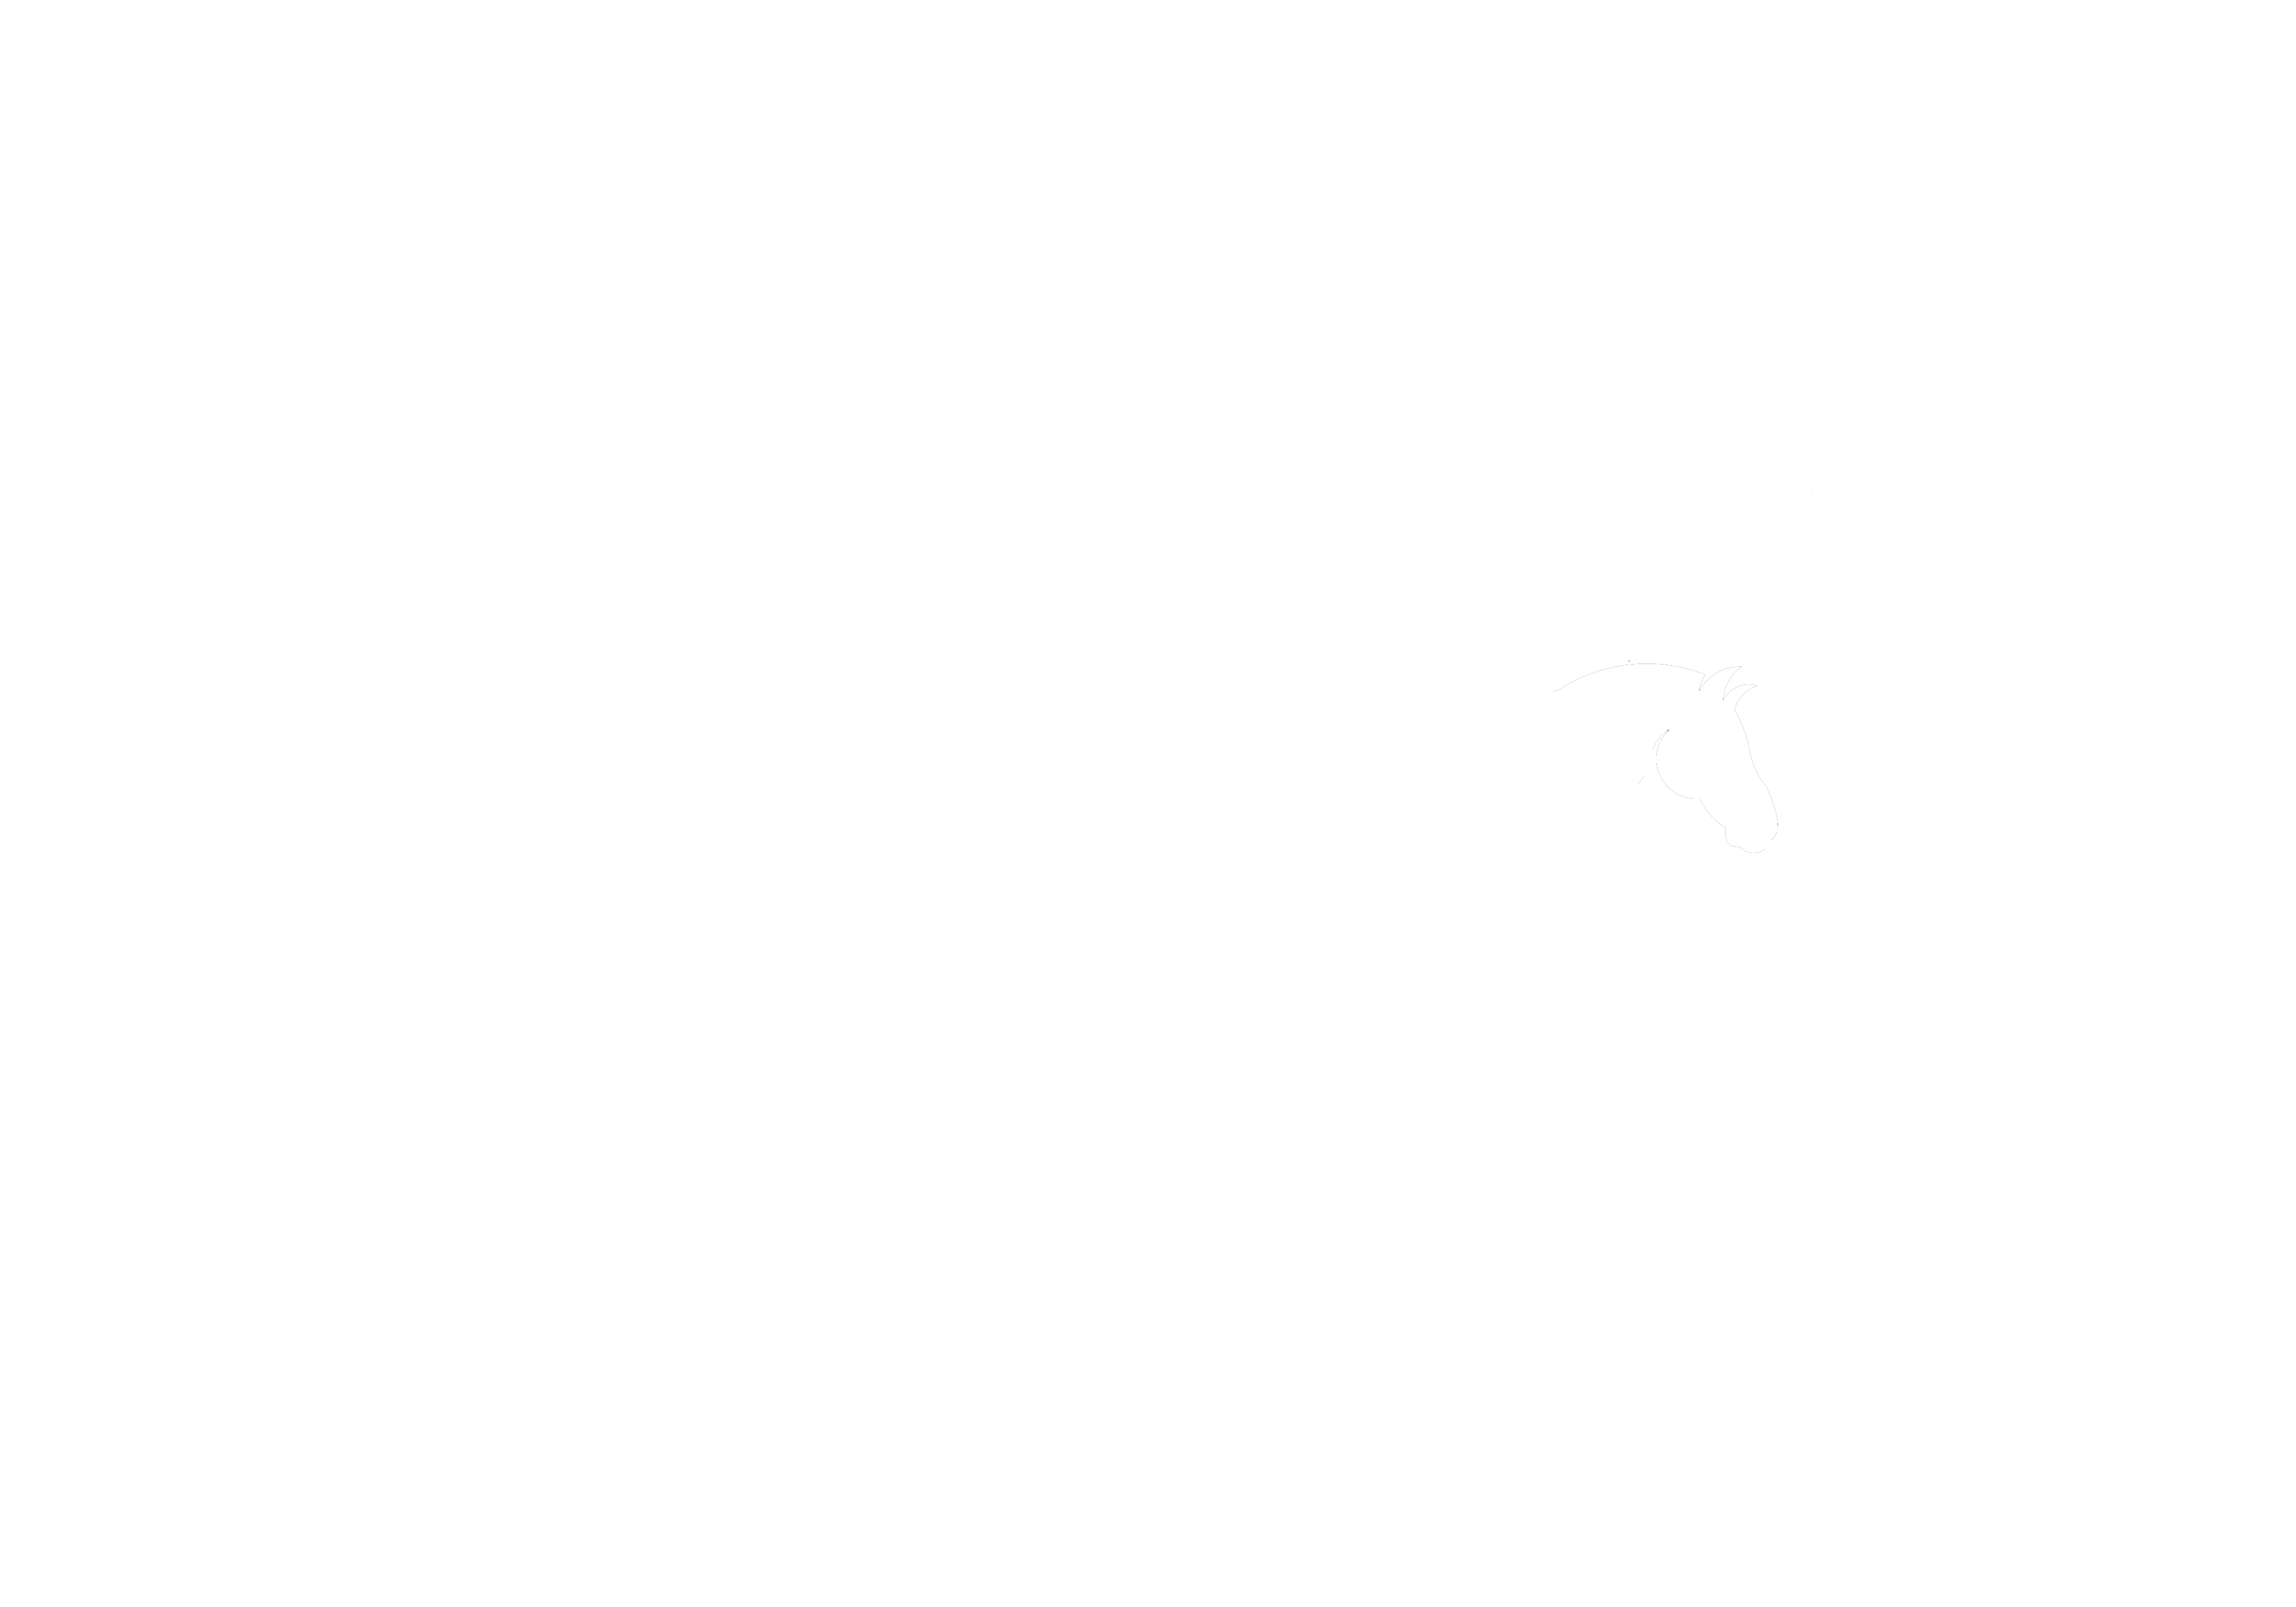 Equbreeding Auction: Exclusive foals, embryos & jumpers